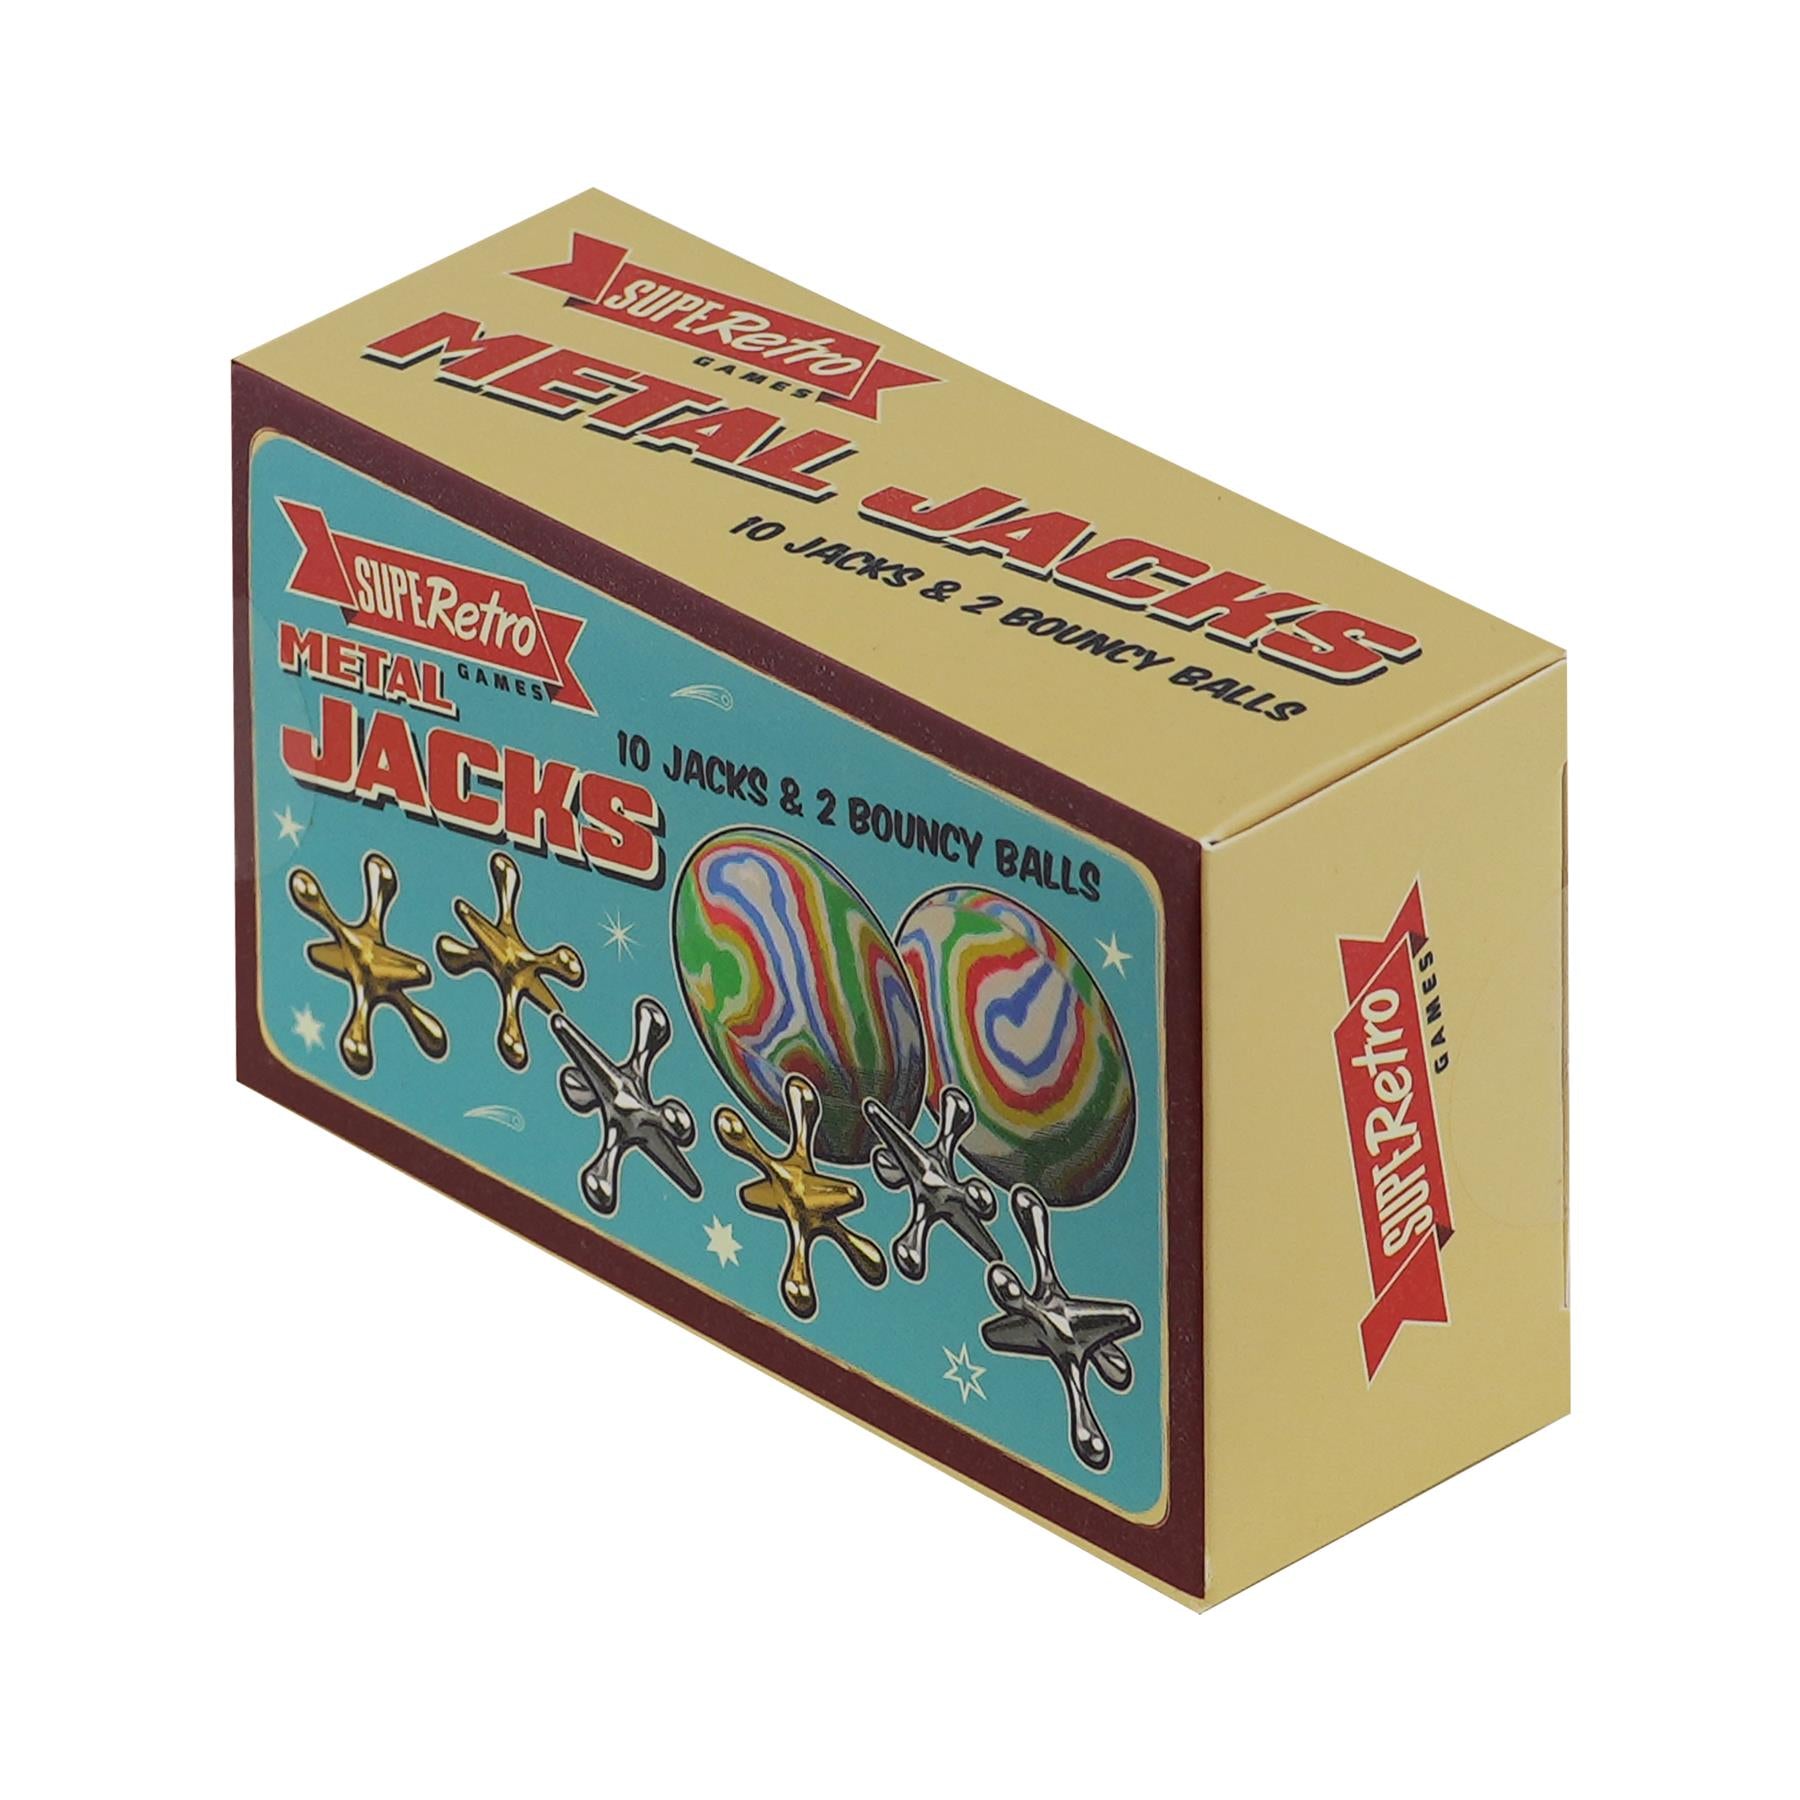 The Magic Toy Shop Classic Game Traditional Metal Classic Jacks Game